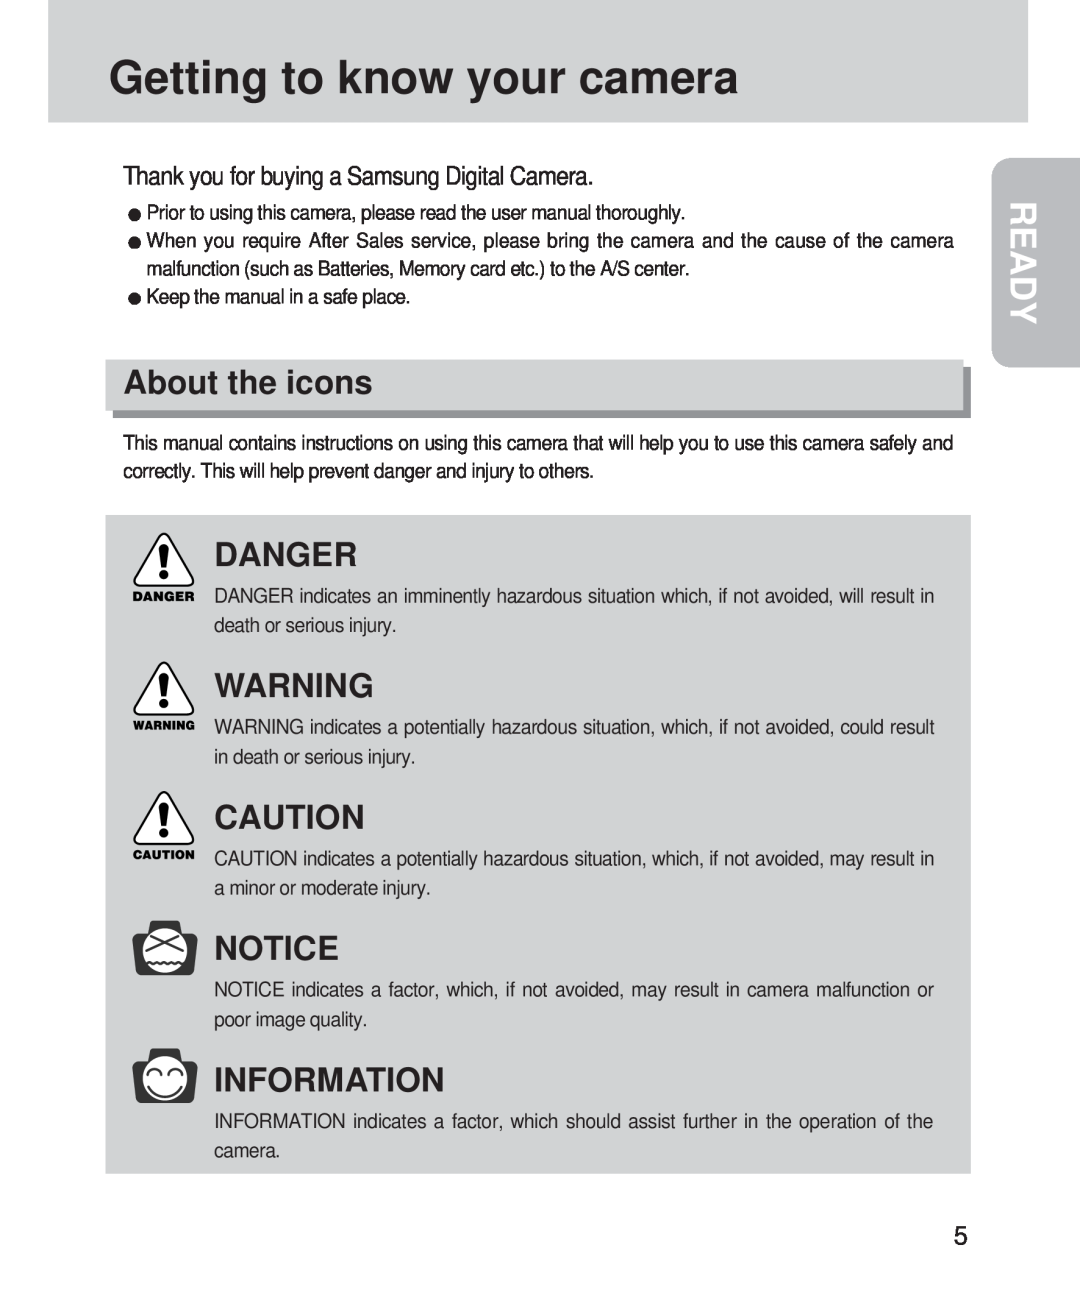 Samsung 420 manual Getting to know your camera, Ready, About the icons, Danger, Information 